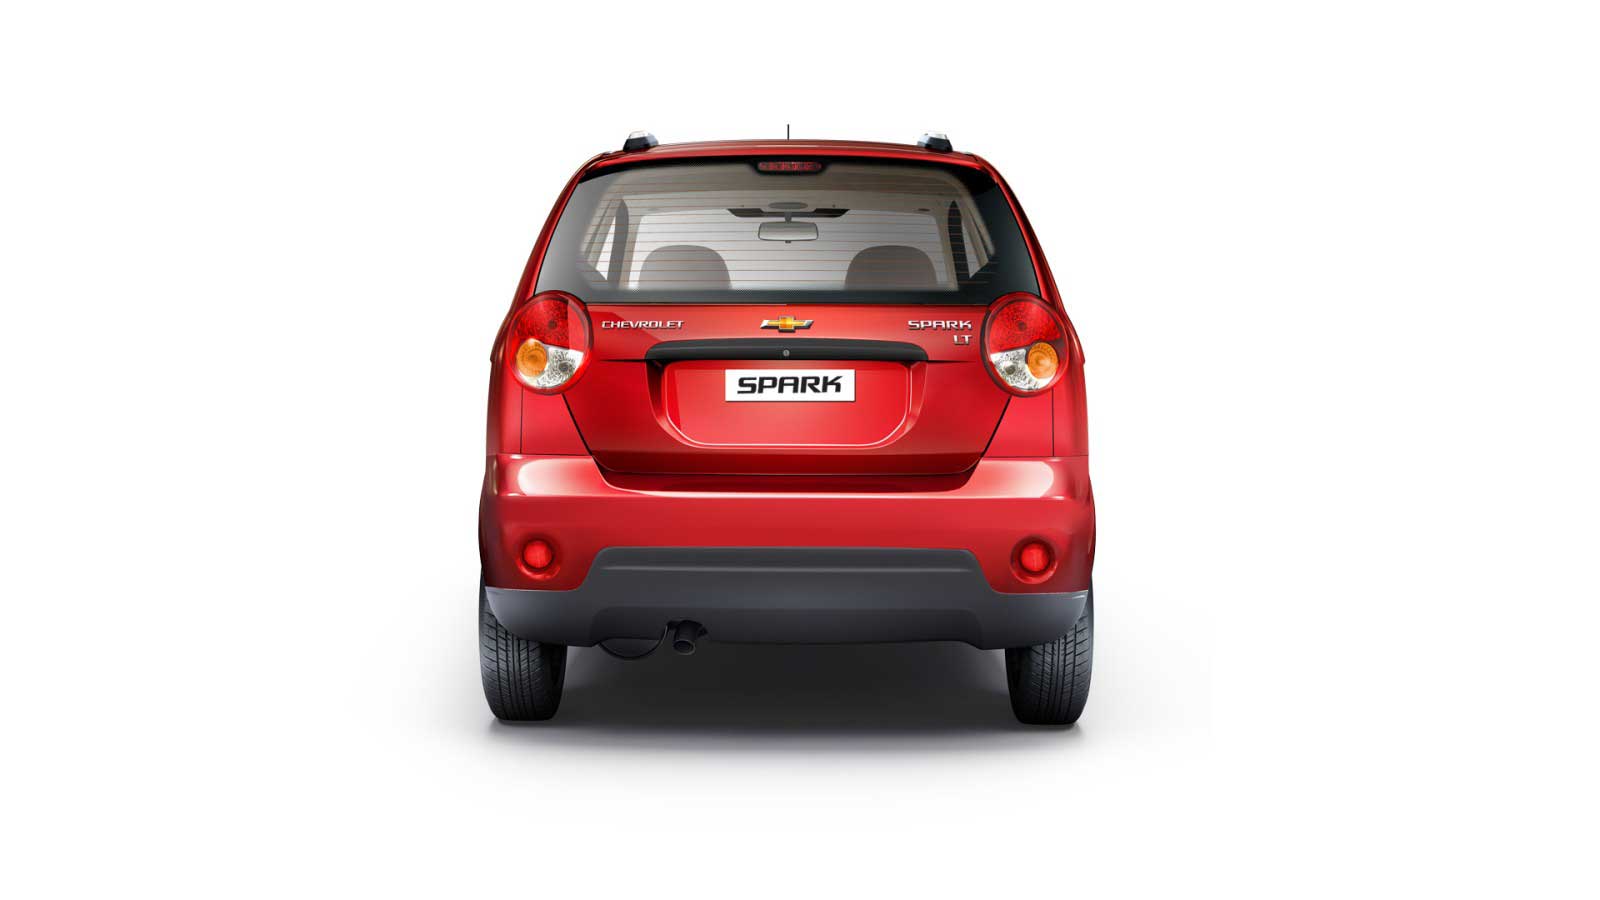 Chevrolet Spark LS 1.0 BS-IV OBDII Exterior rear view